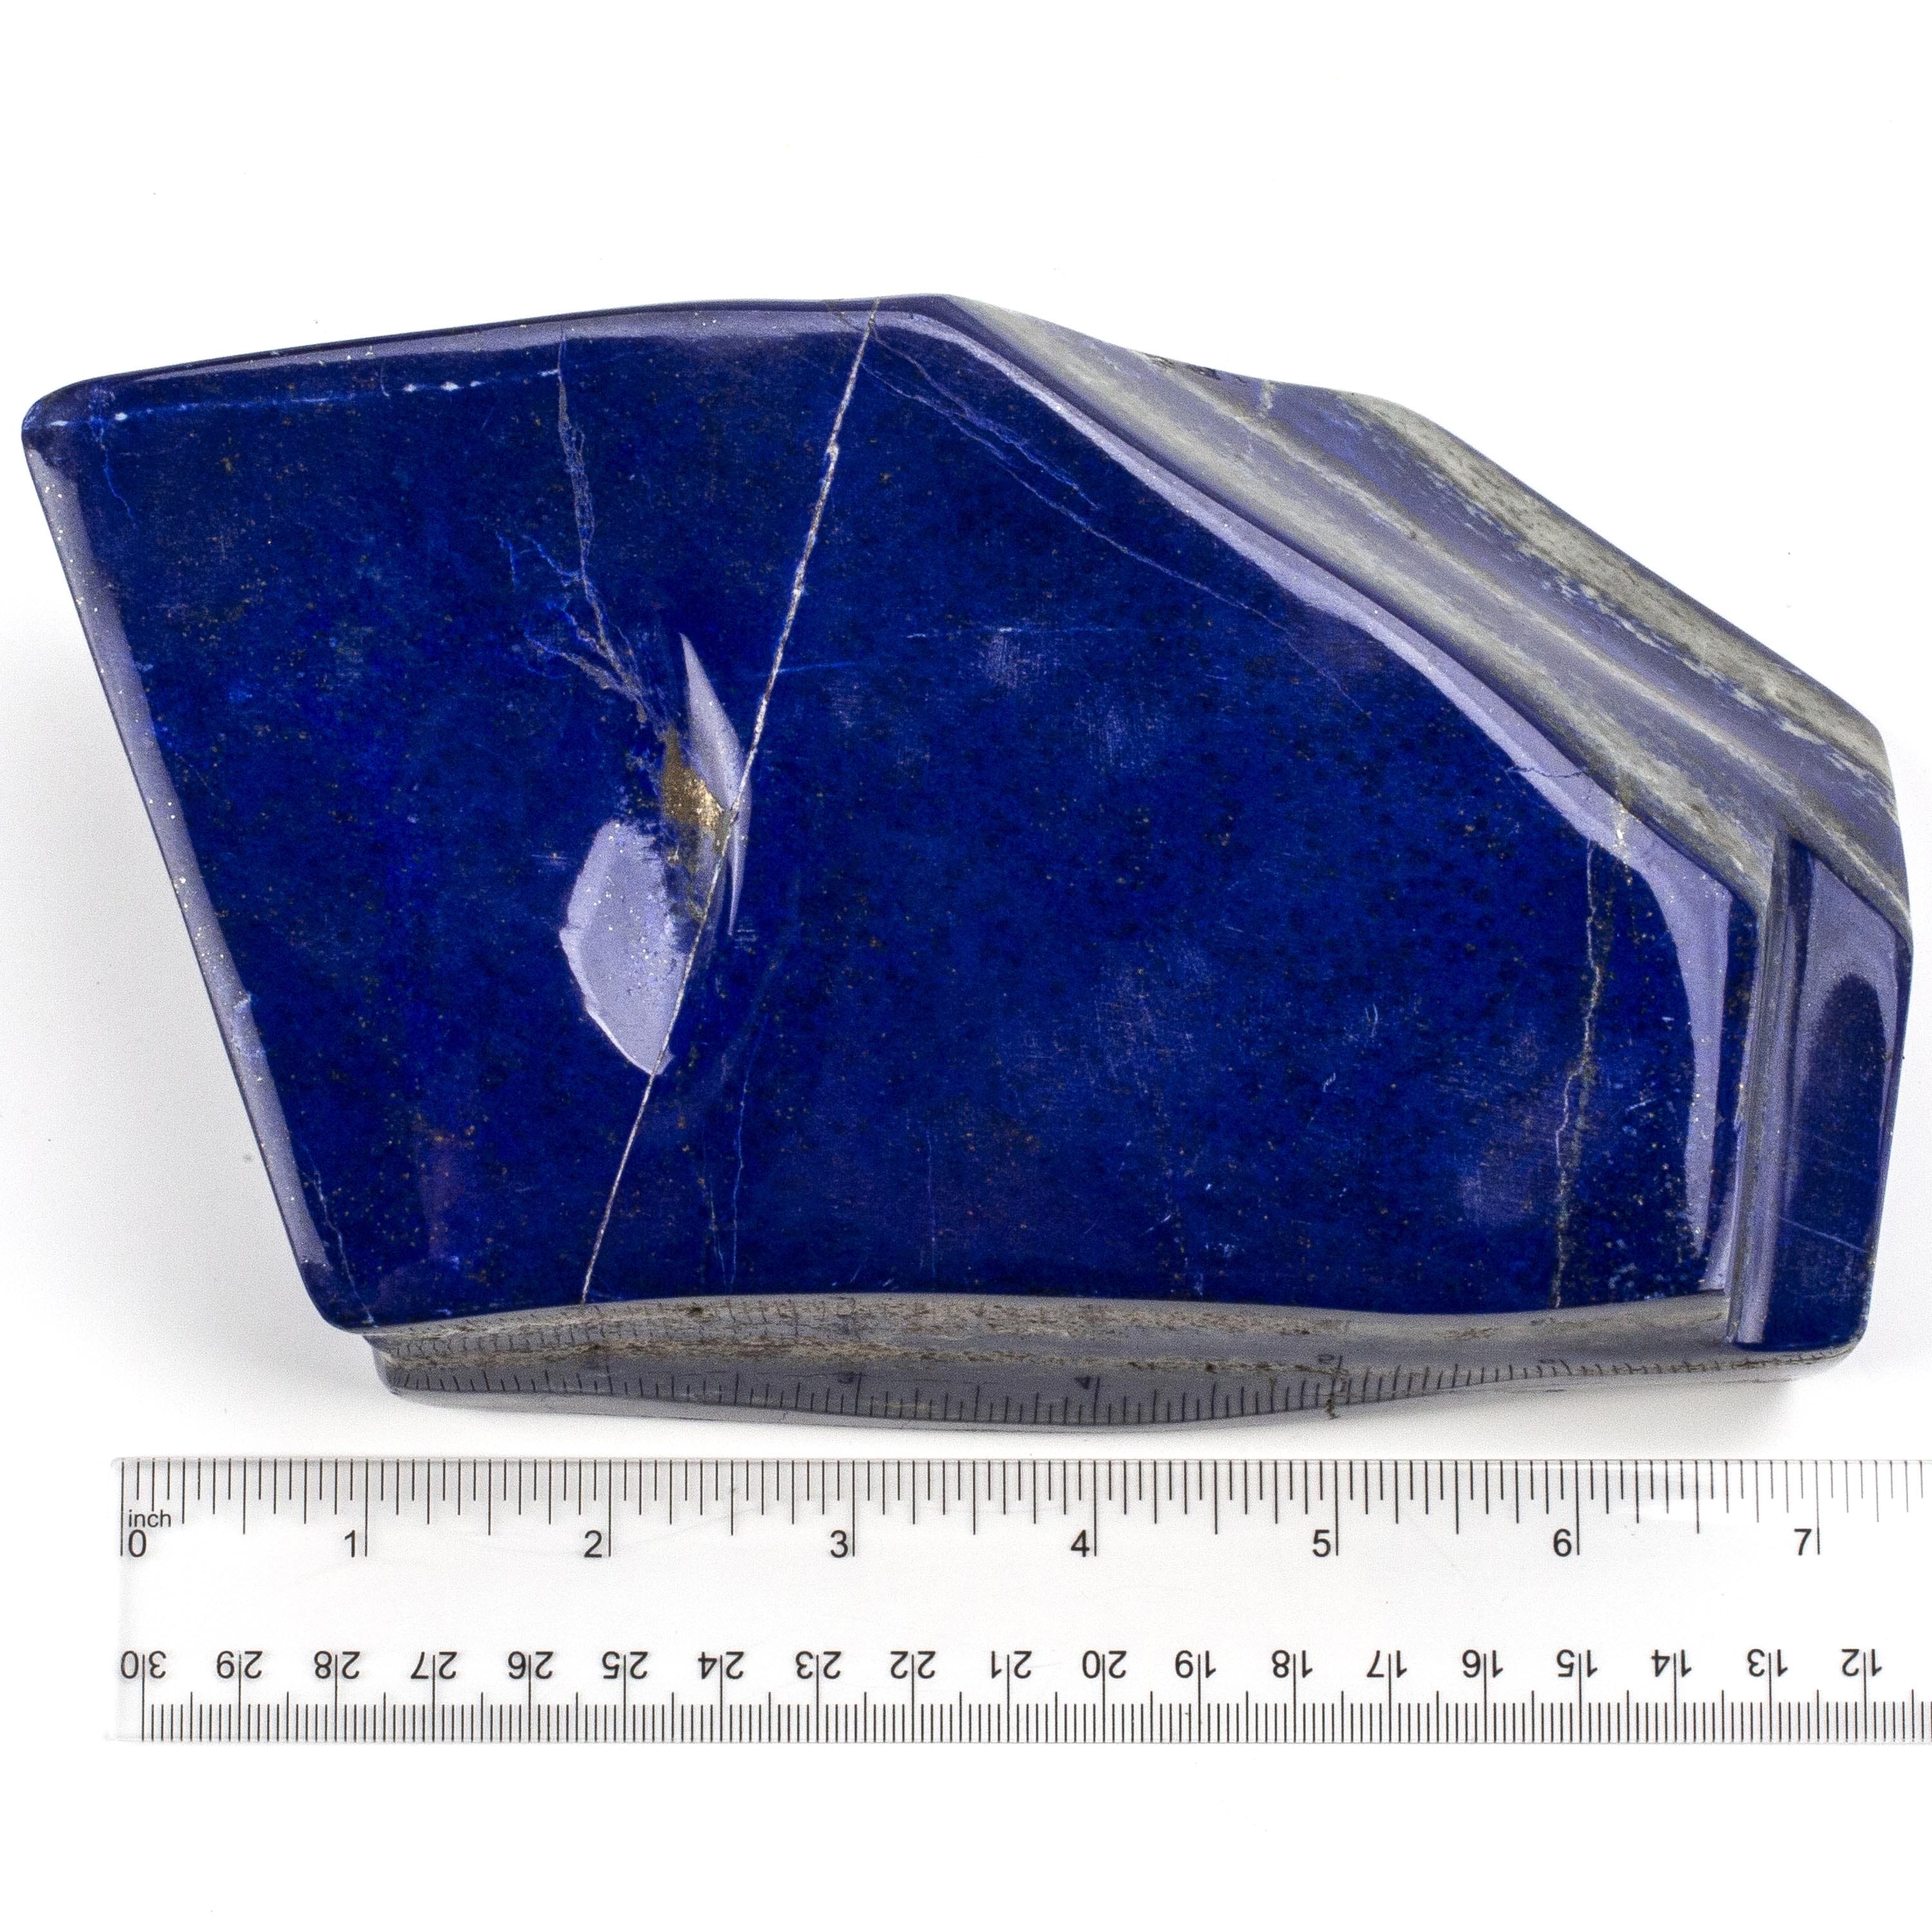 Kalifano Lapis Lapis Lazuil Freeform from Afghanistan - 2.4 kg / 5.2 lbs LP2500.001